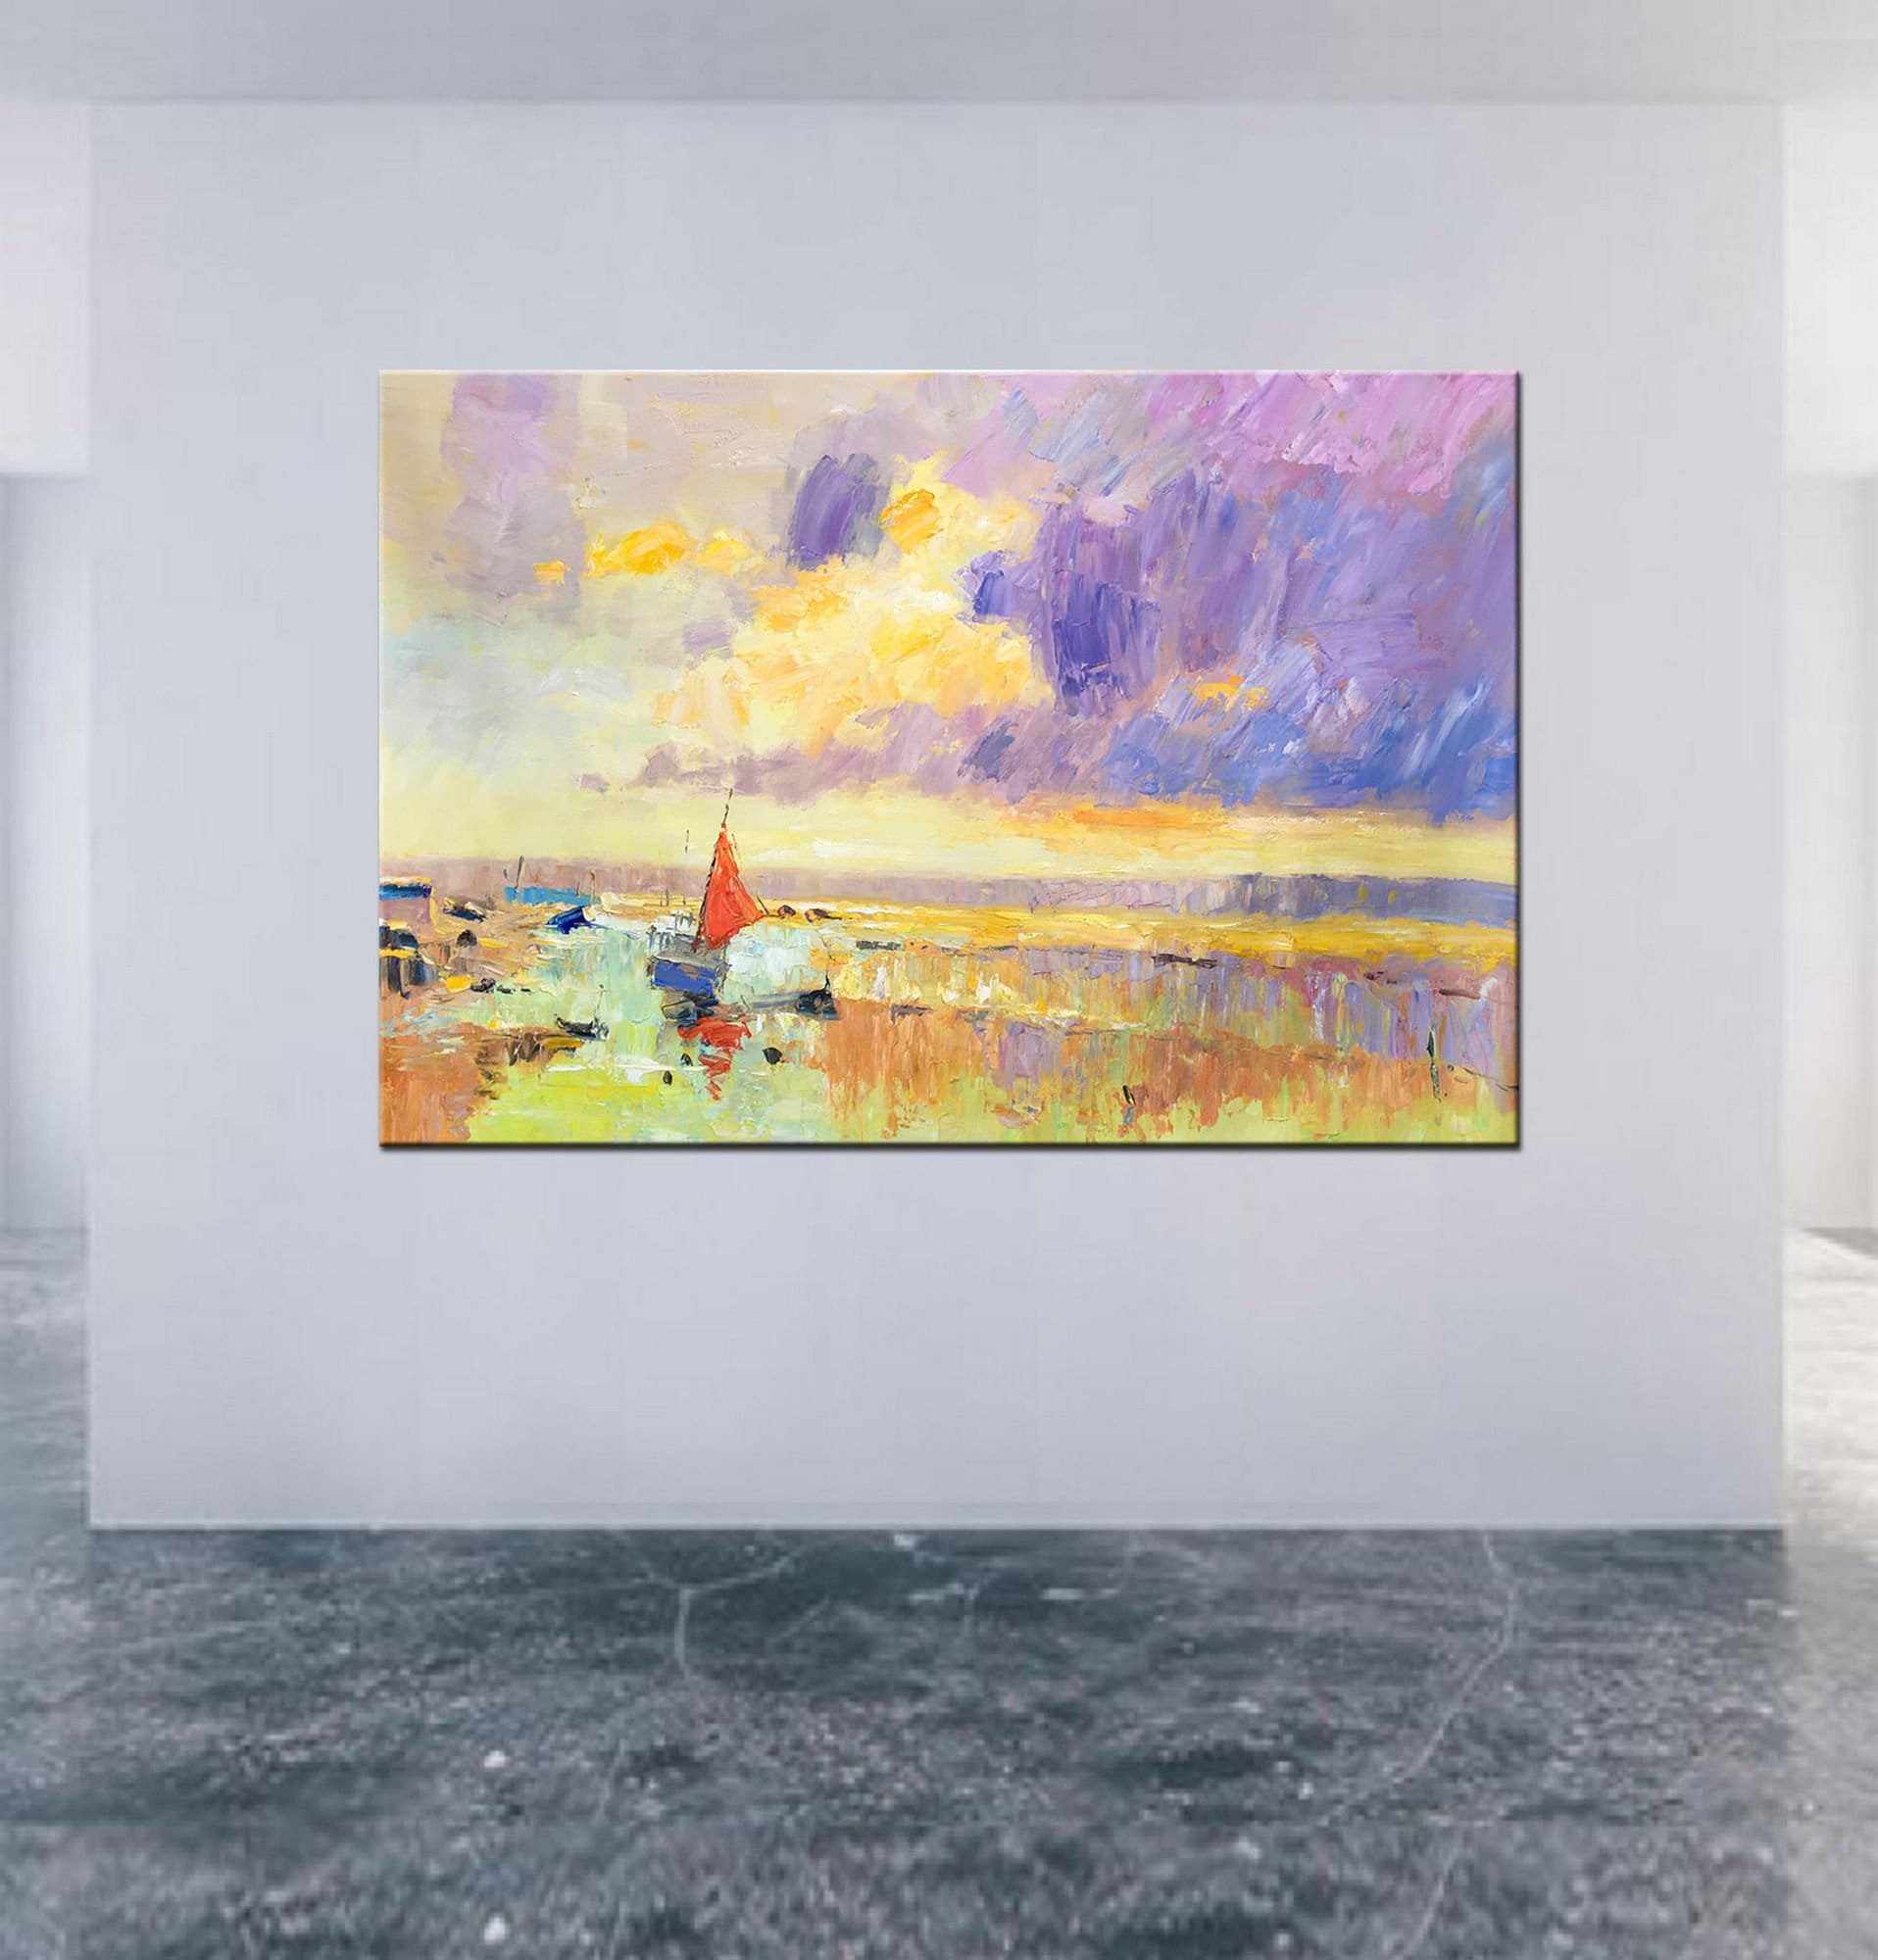 Oil Painting, Abstract Canvas Painting, Bedroom Wall Decor, Contemporary Art, Large Painting, Painting Abstract, Canvas Wall Decor, Seascape